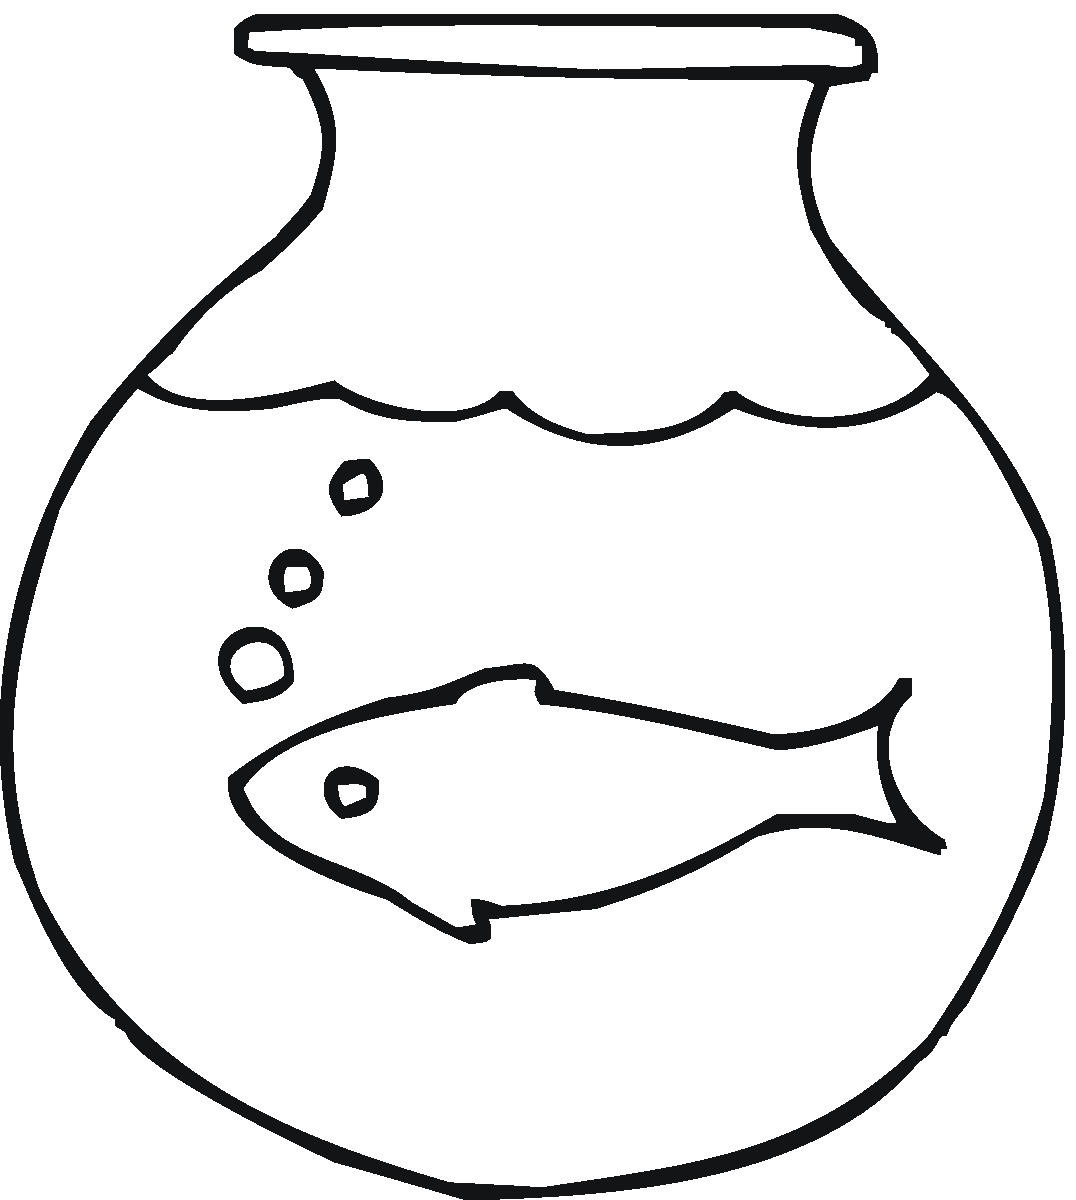 Fish bowl clipart black and white